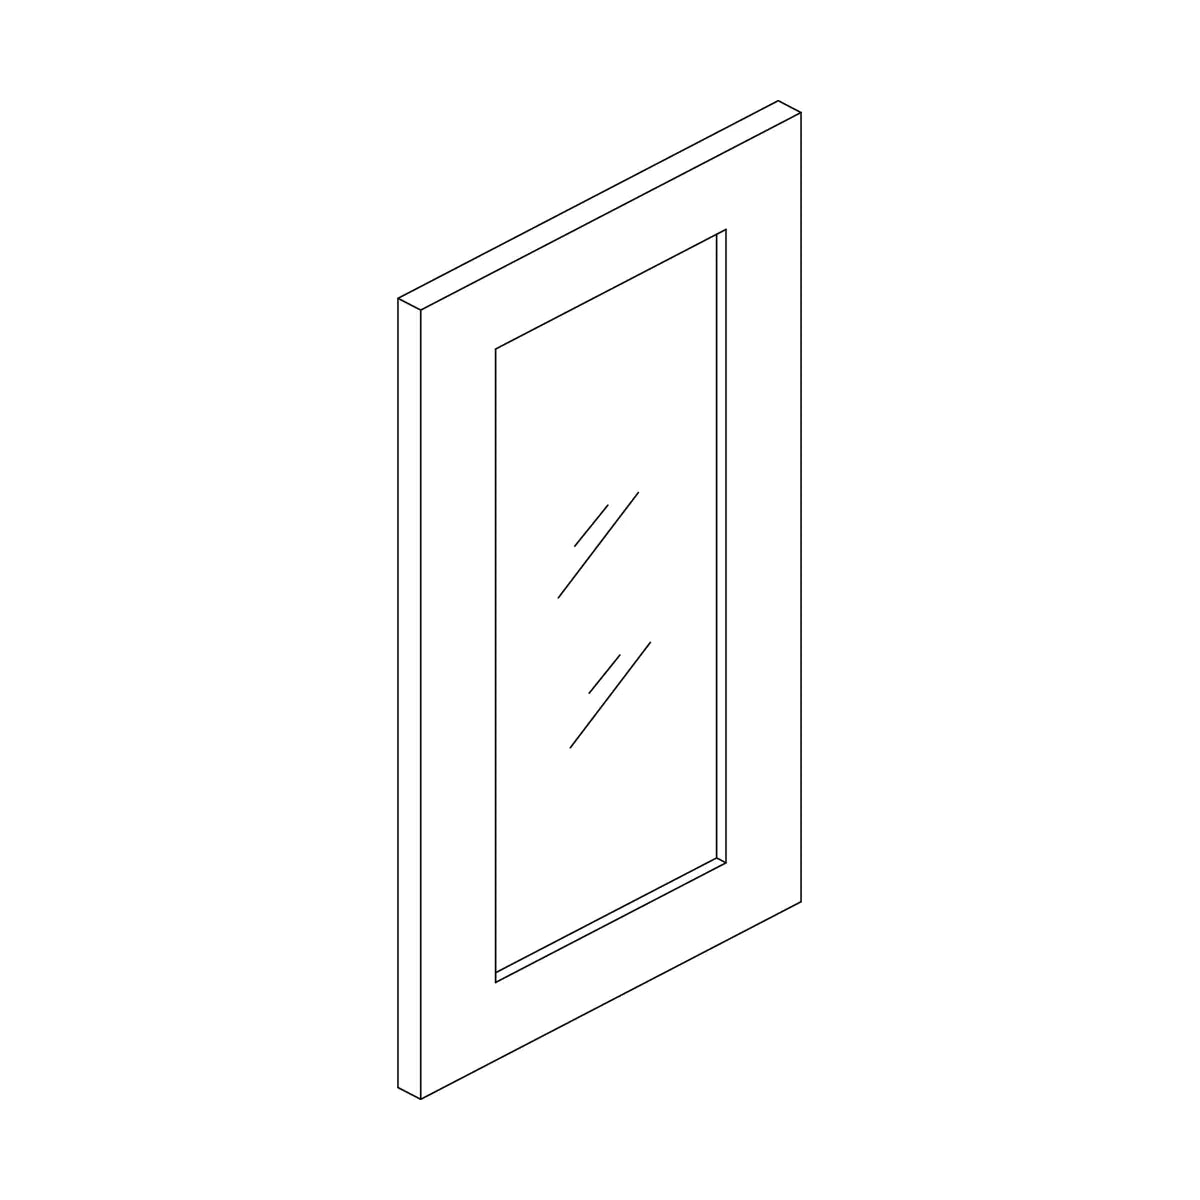 Craft Cabinetry Recessed Panel Gray Stain 14.5”W x 41”H Glass Door for W1542 Image Specifications